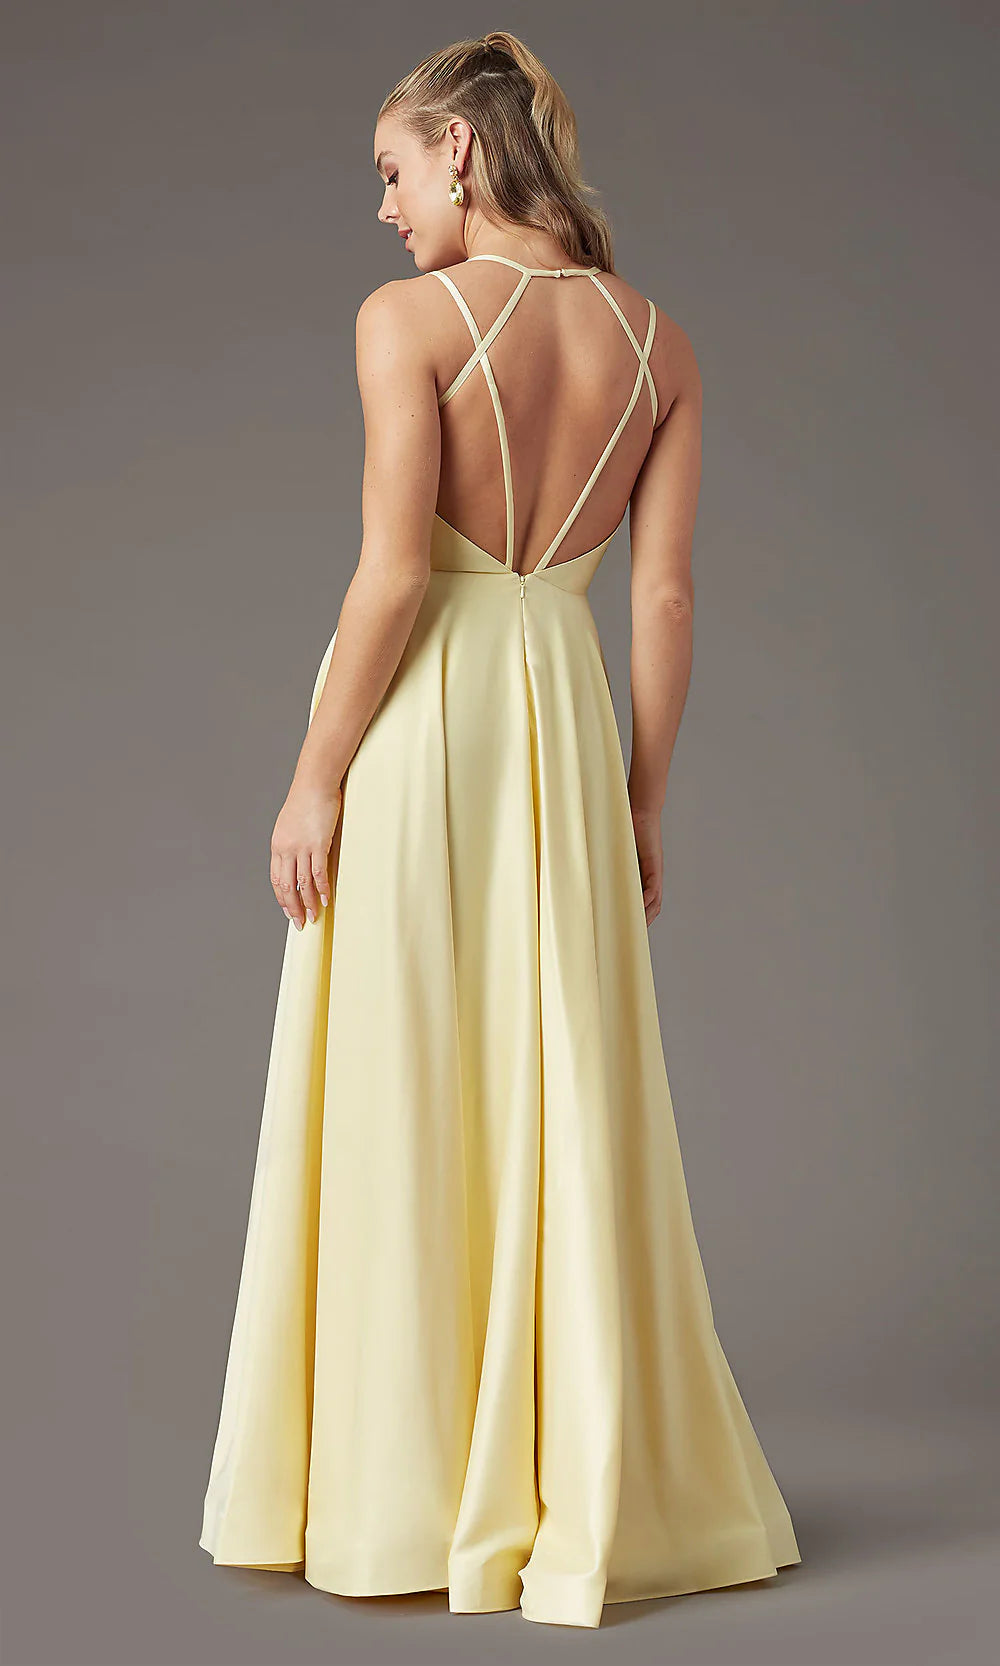 PG Soft Yellow A-Line Satin Evening Gown